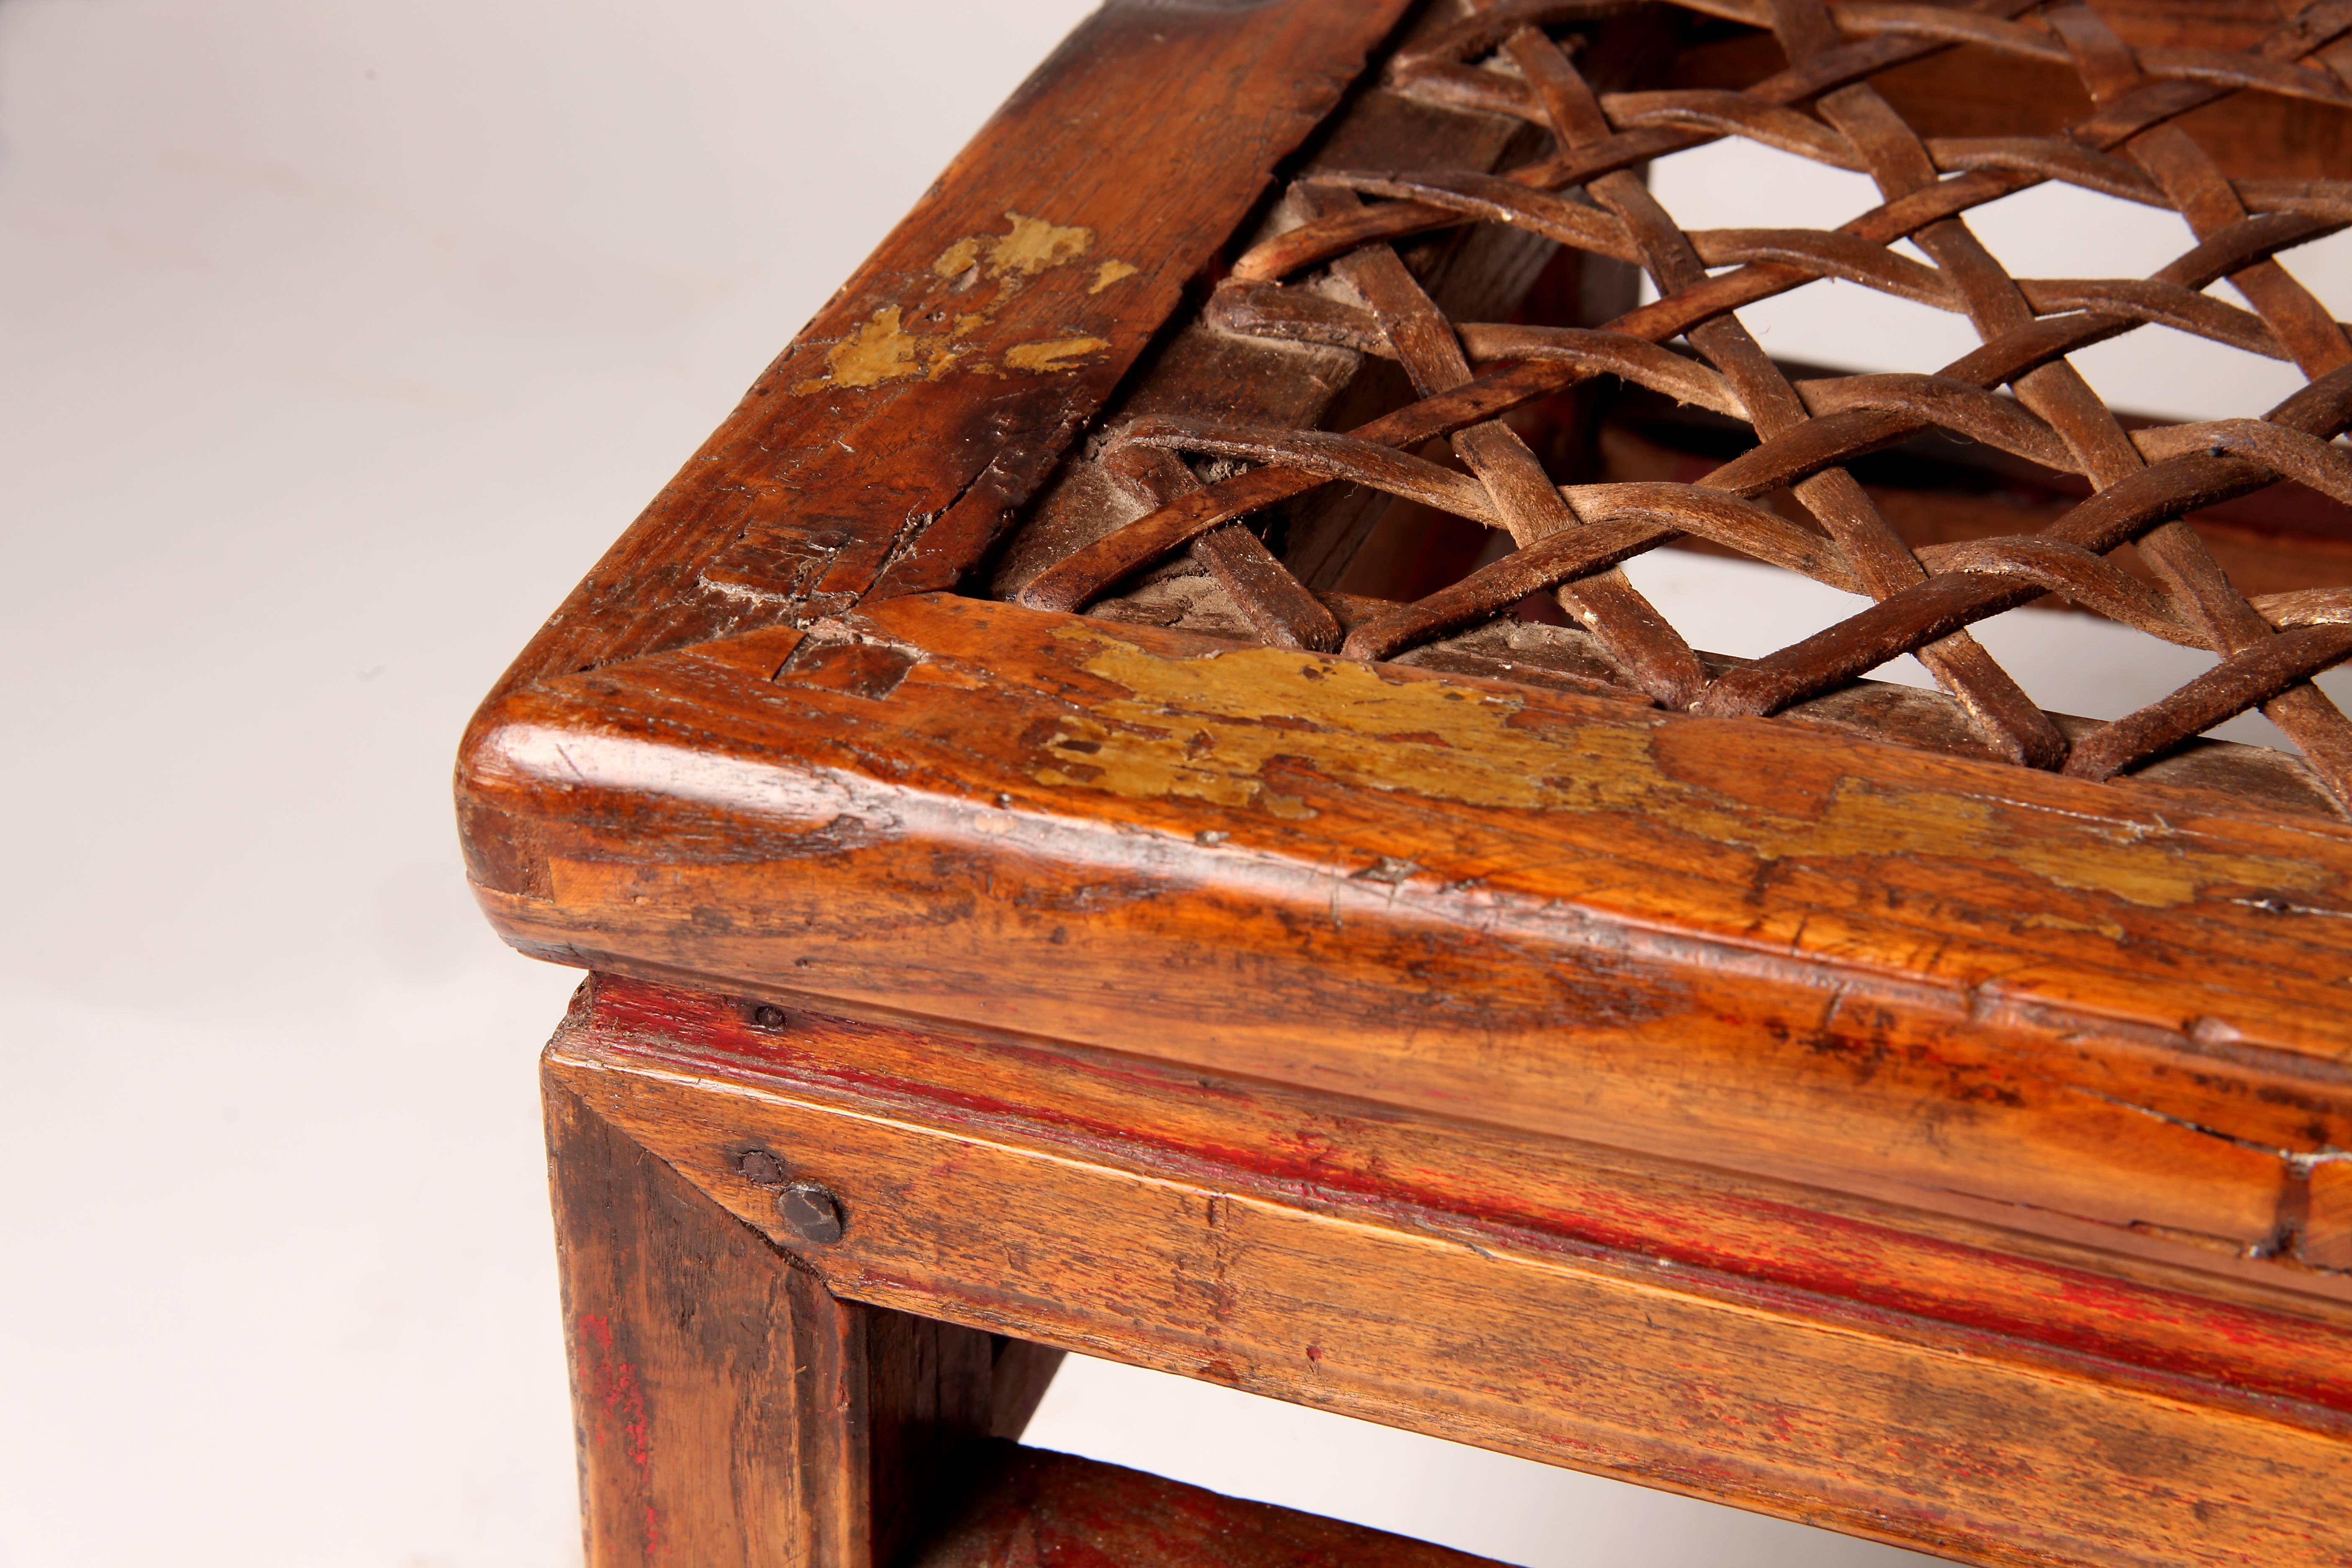 20th Century Chinese Rectangular Stool with Woven Seat and Horse-Hoof Feet